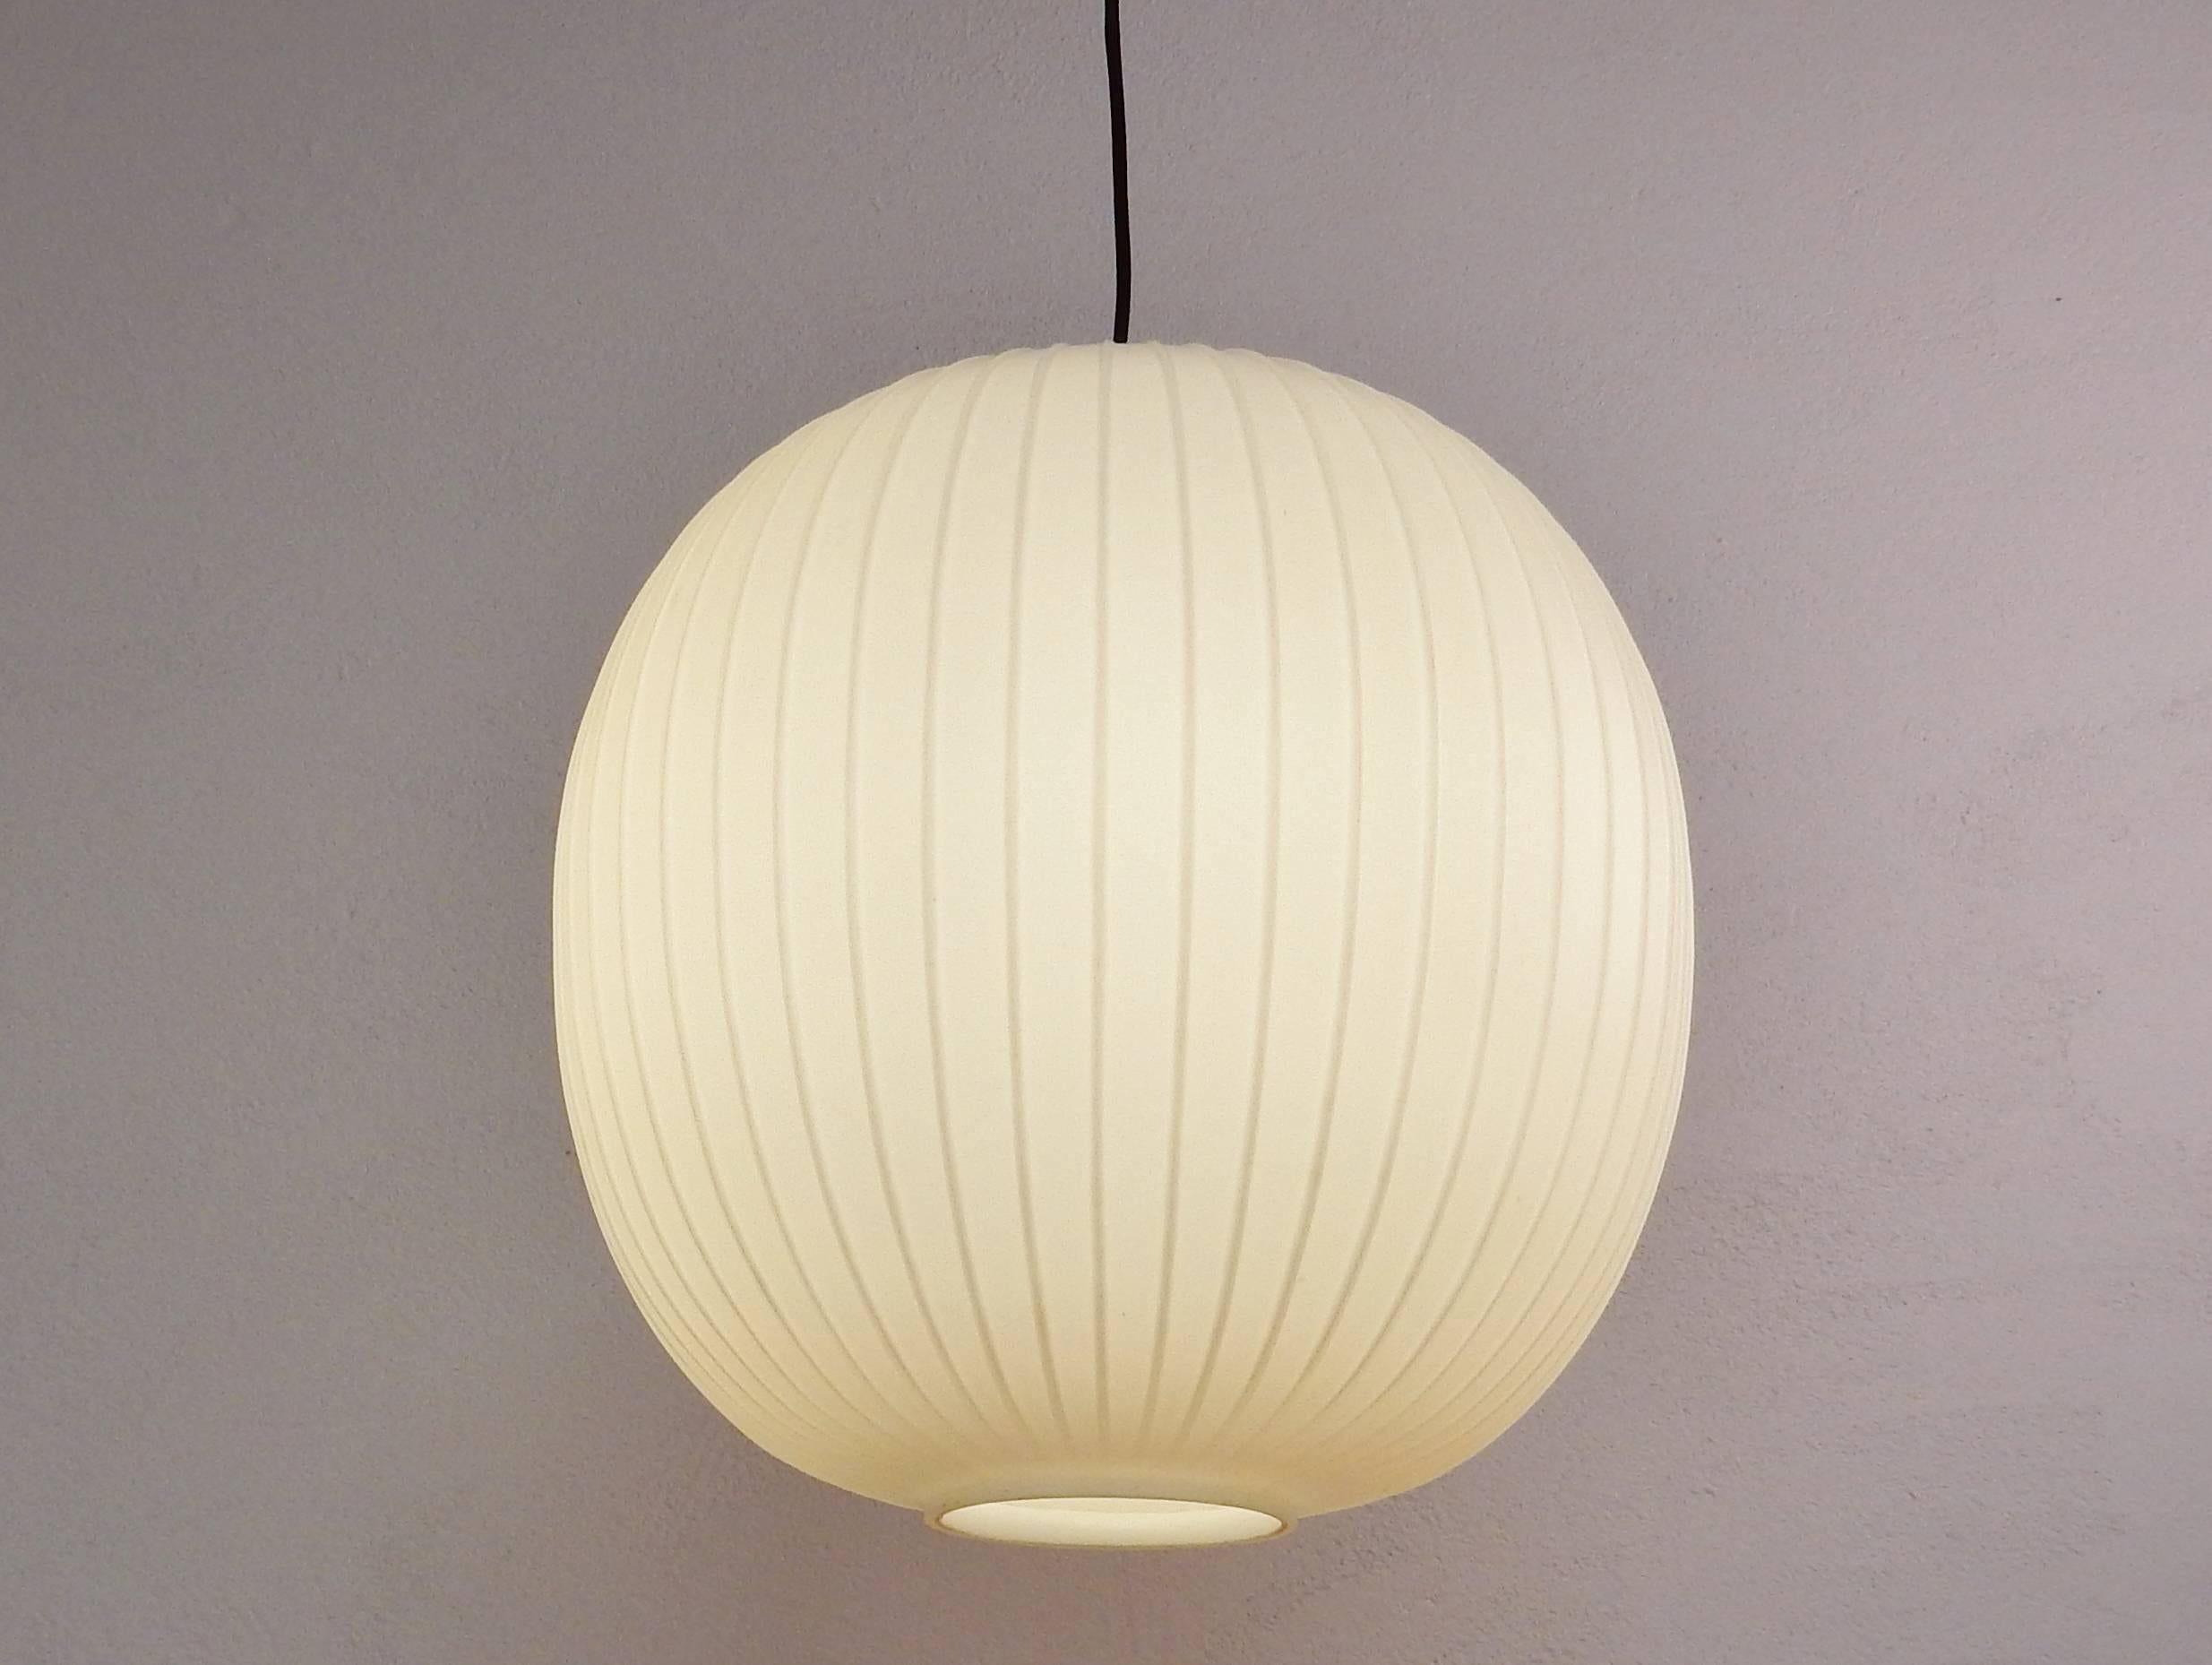 This opaline glass pendant light is in a very good condition considering age and use. Some very minor chip loss to top and bottom that maybe should not even need mentioning. This light is in original, rewired, condition and has the Peill & Putzler